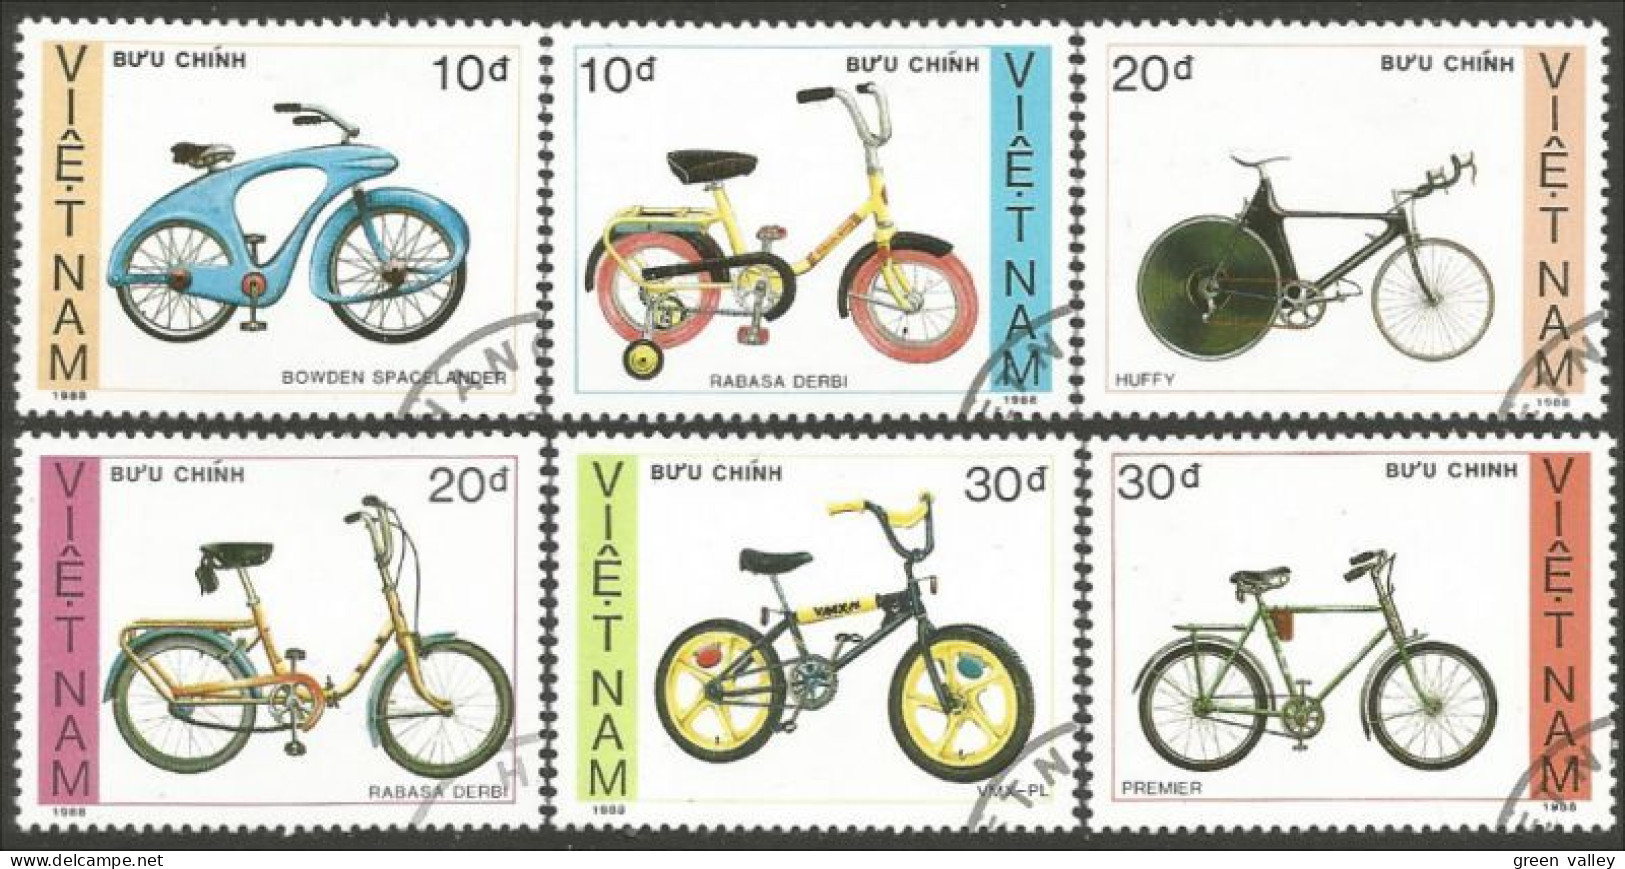 SPCY-21 Vietnam 1988 Bicyclette Bicycle Fahrrad Bicicletta Fiets - Cycling